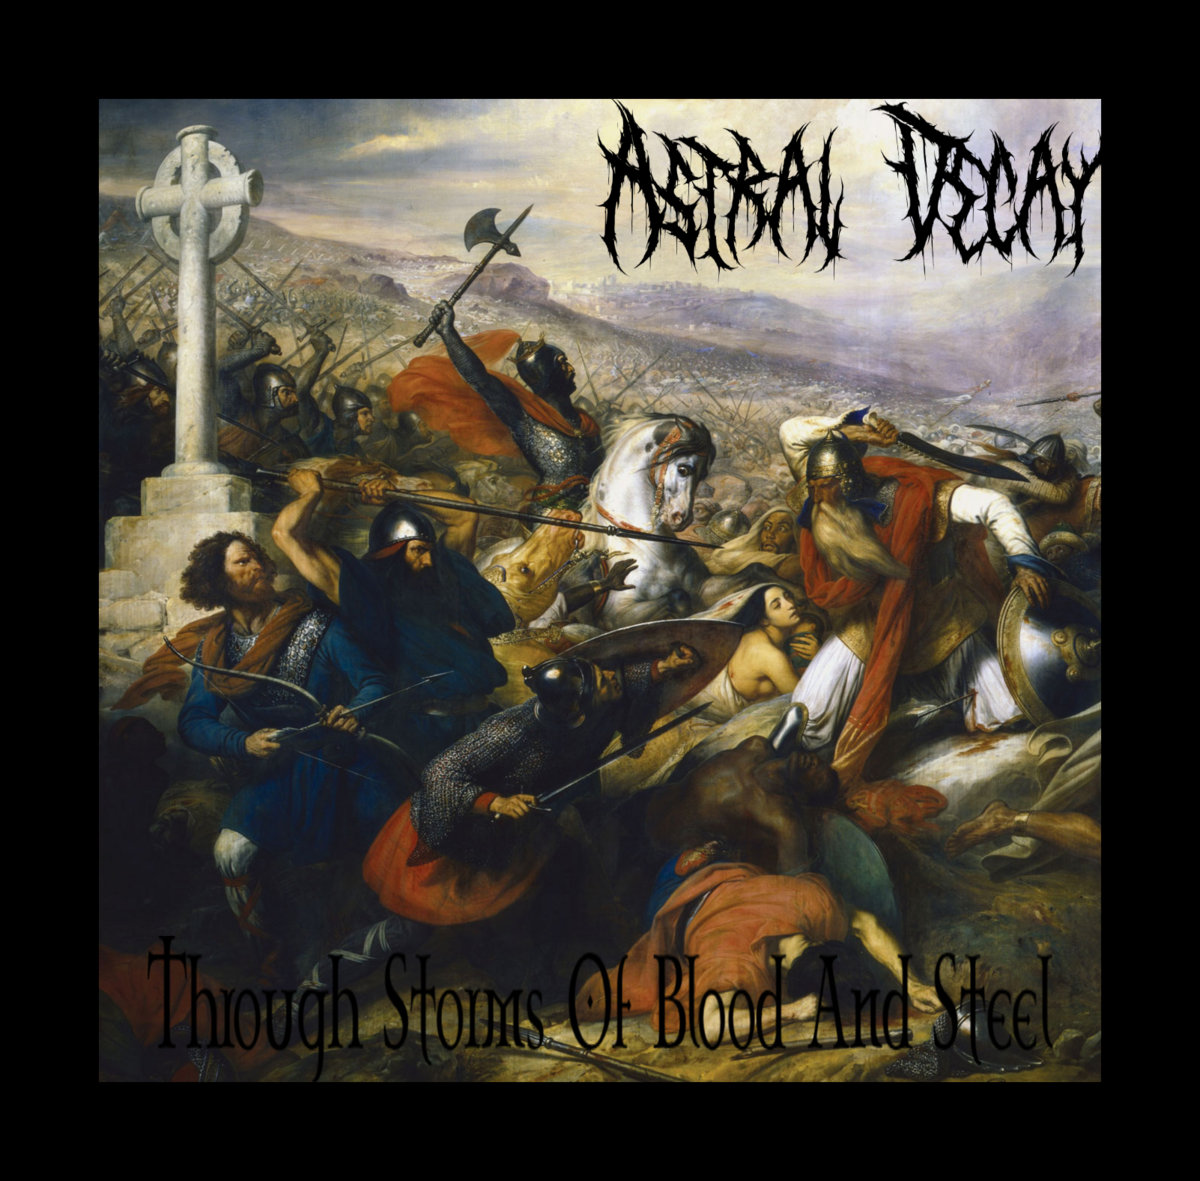 astral decay – through storms of blood and steel [ep]